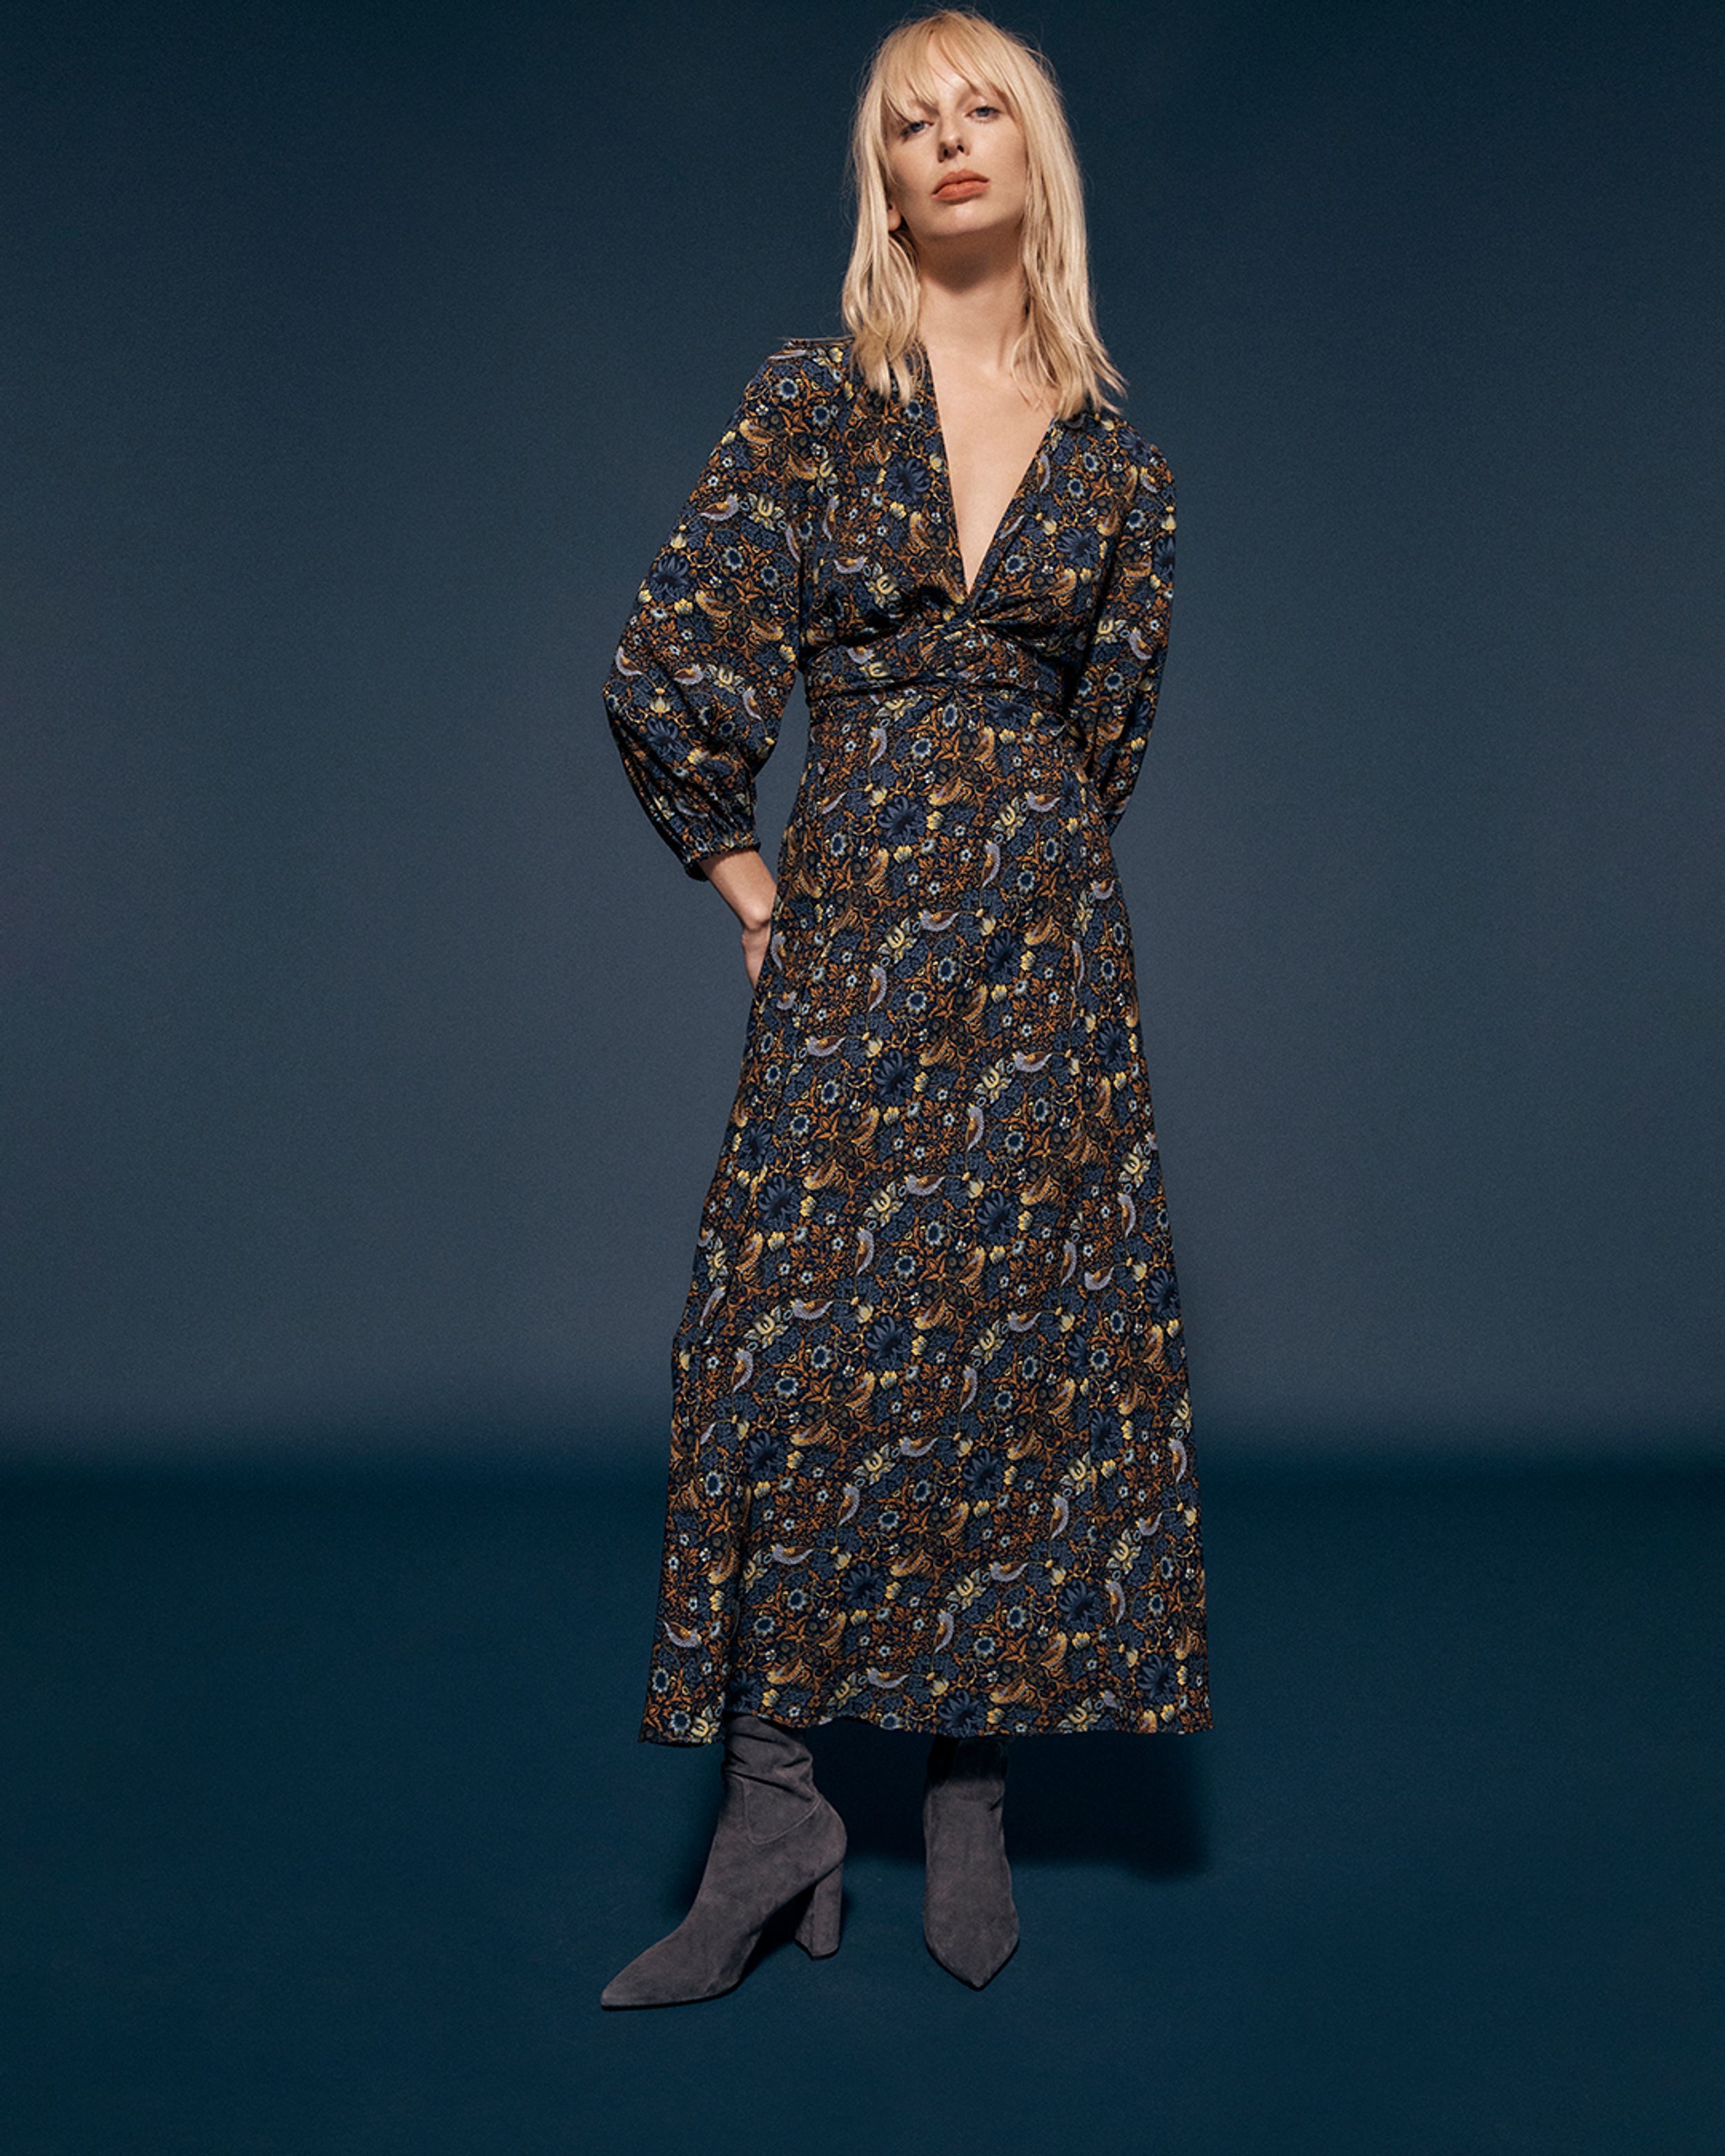 Blonde model standing in a navy floral-print dress